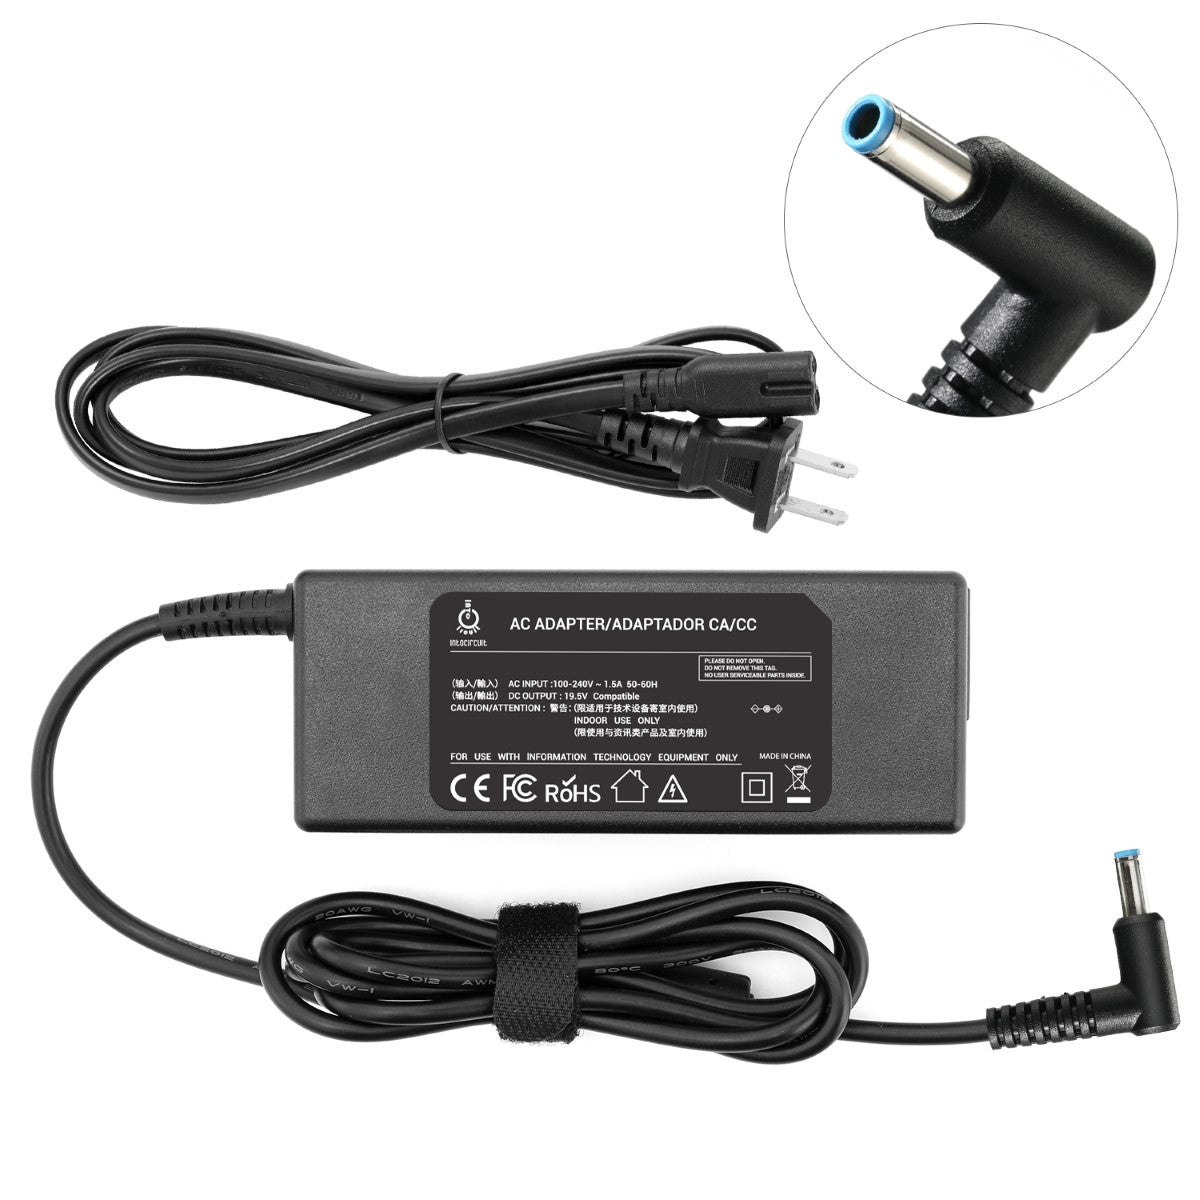 Charger for HP 255 G2 F7V56UT Notebook